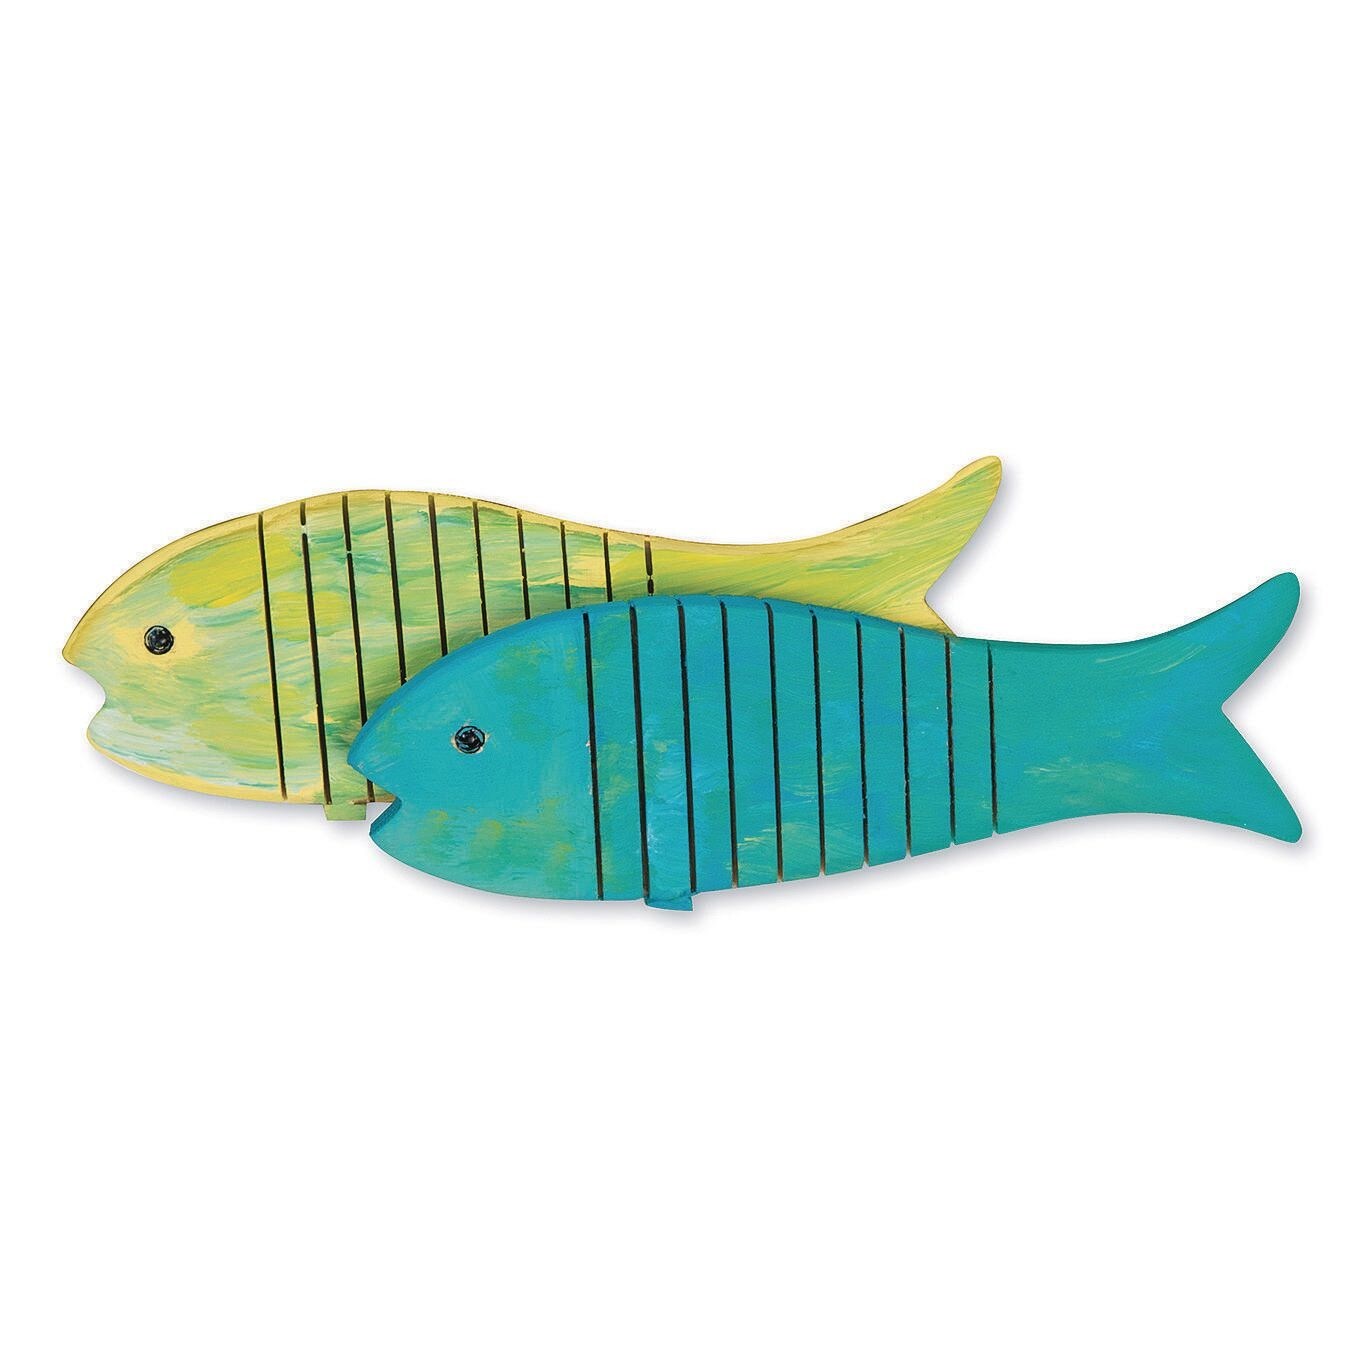 S&S Worldwide Flexible Wood Fish Craft Kit, Includes Wood Fish, Paint &  Brushes. For Kids & Adults. Fish are 5-3/4l x 1-3/4h. Makes 12.